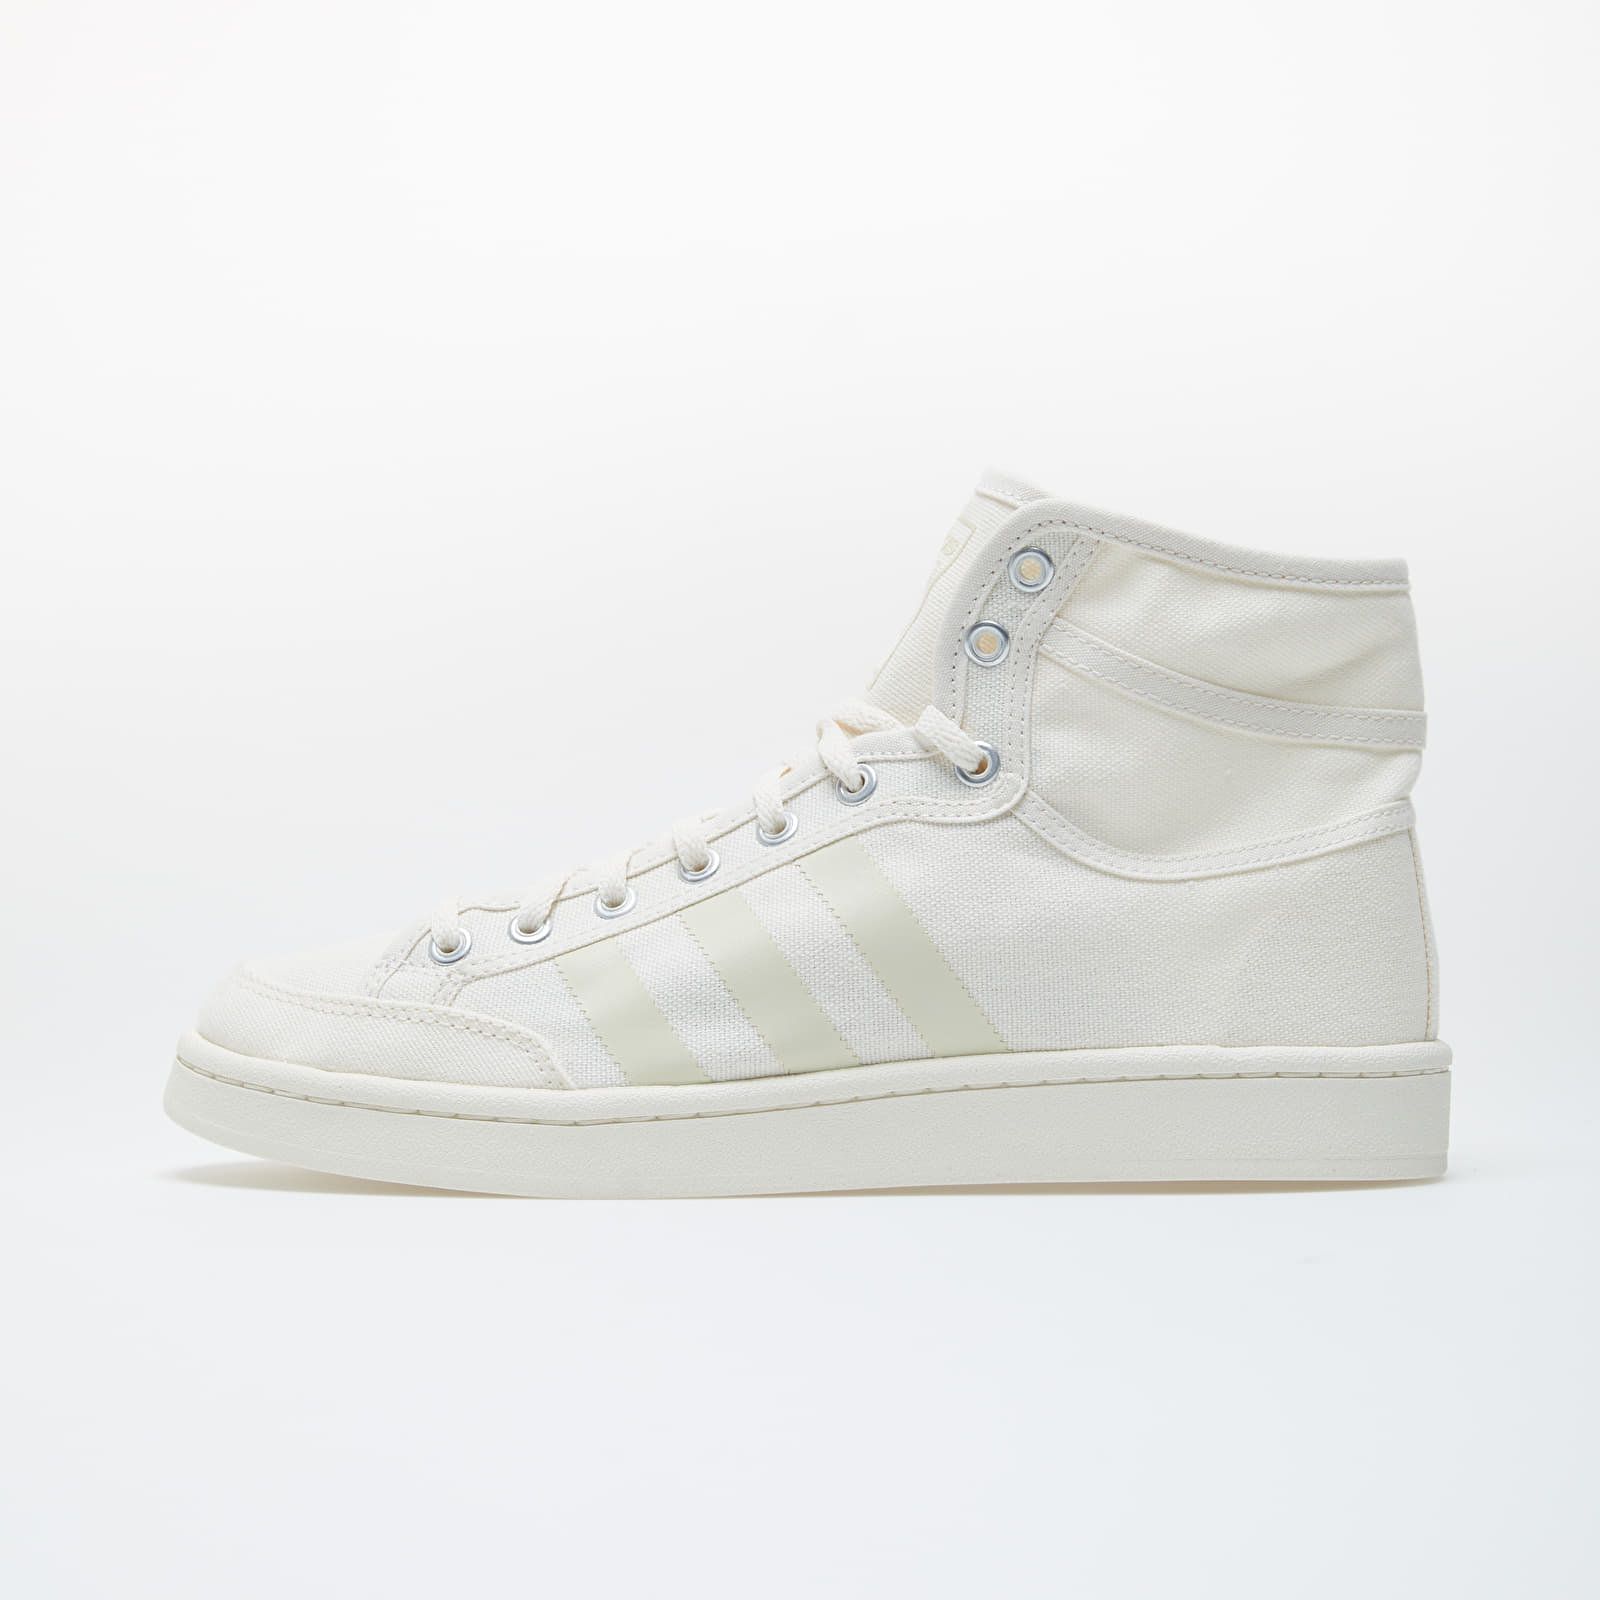 Chaussures et baskets homme adidas Americana Decon Core White/ Core White/ Core White